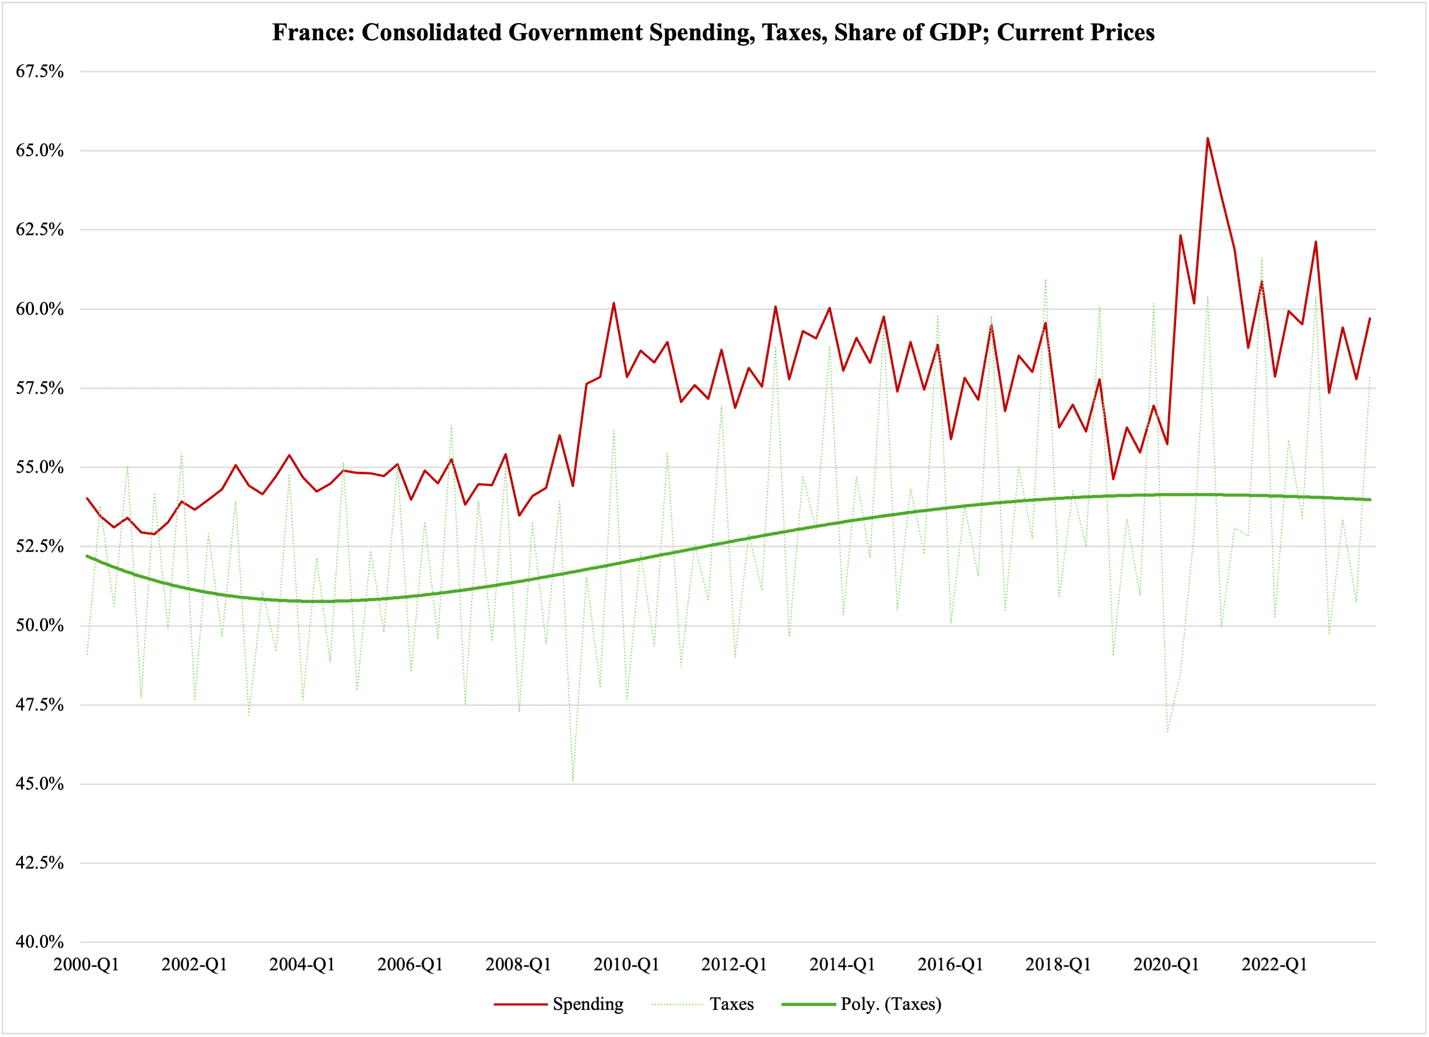 A graph of the price of the government

Description automatically generated with medium confidence